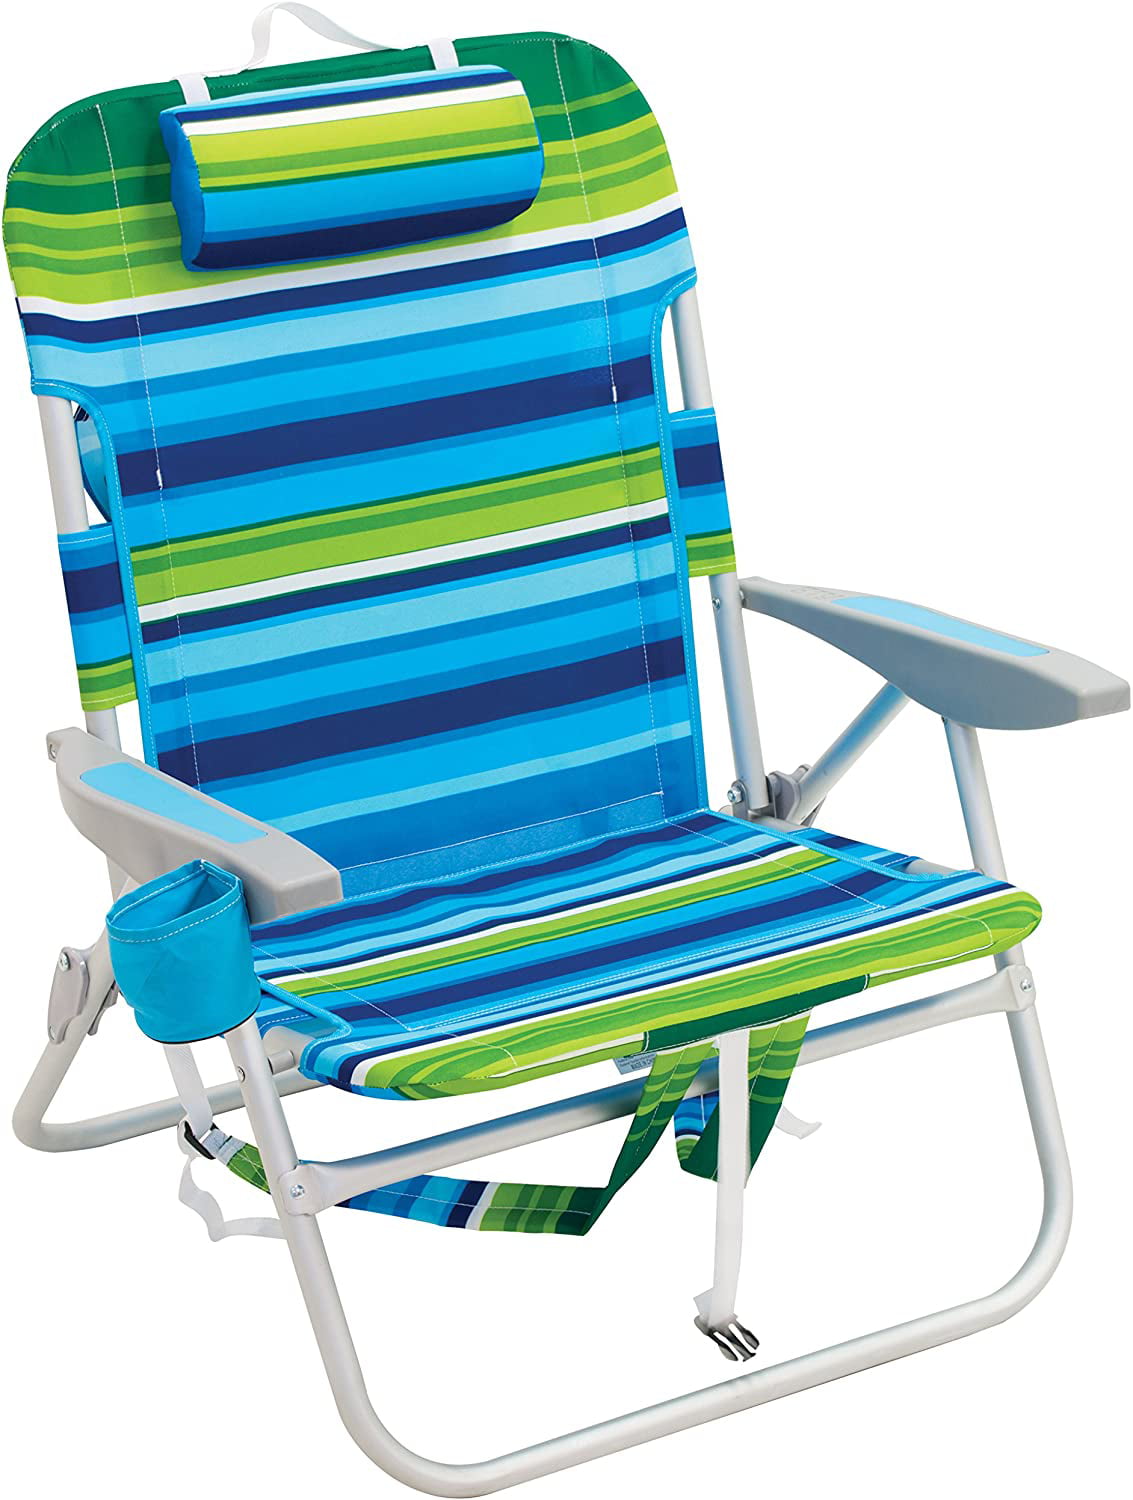 Backpack Lawn Chair Ideas - 14 Best Beach Chairs For Relaxing In The ...